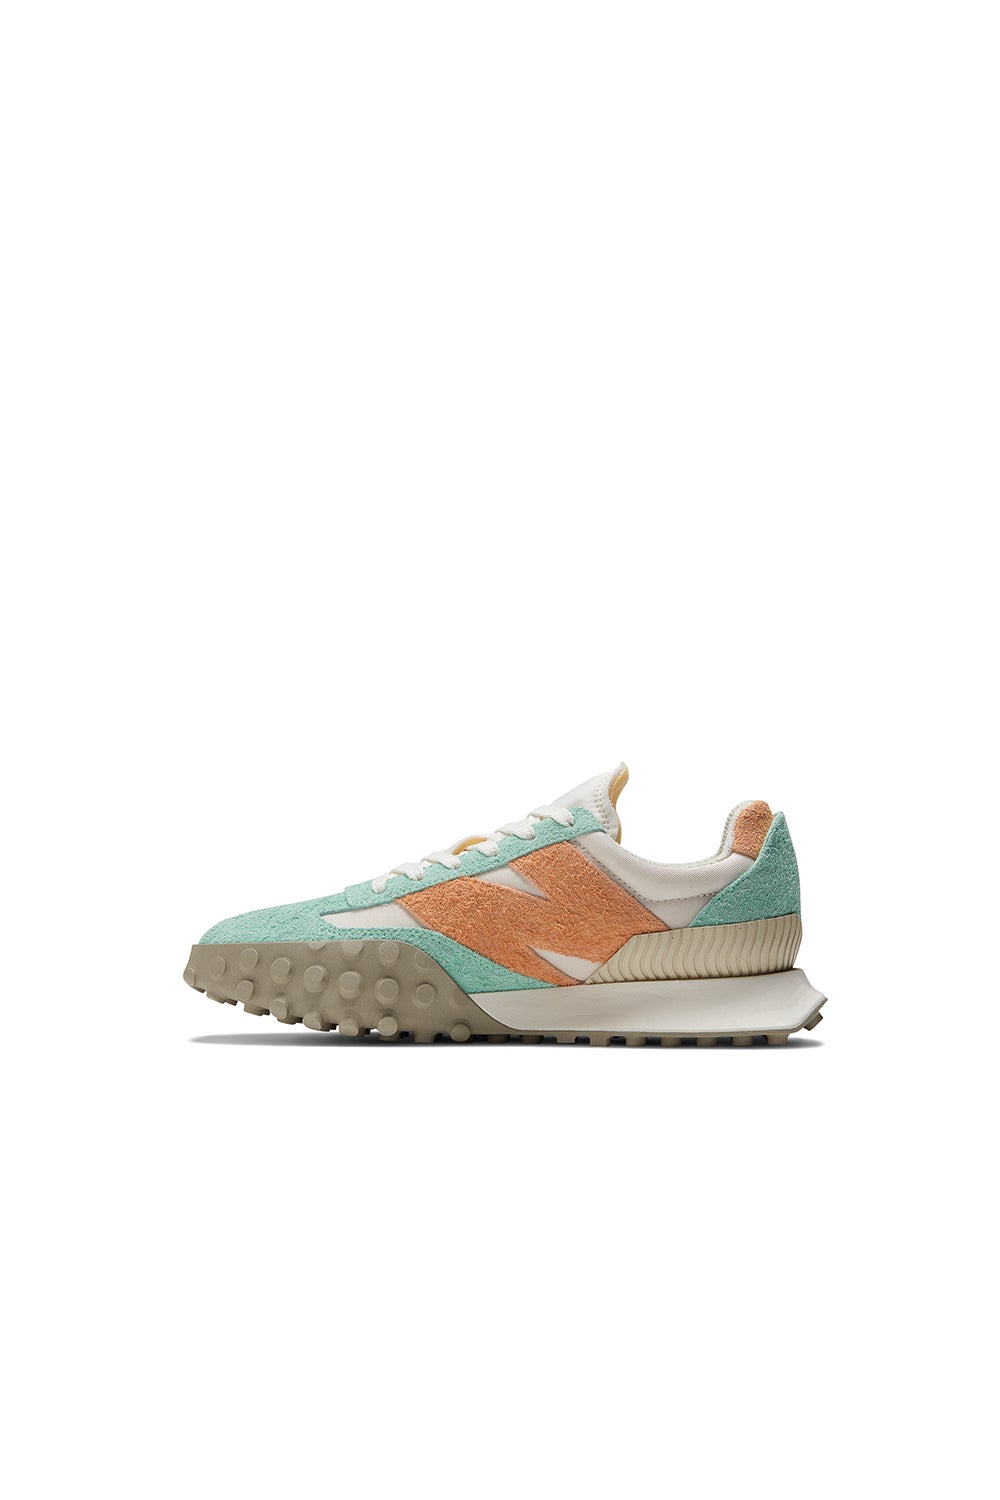 New Balance XC-72 Bright Mint with Ginger